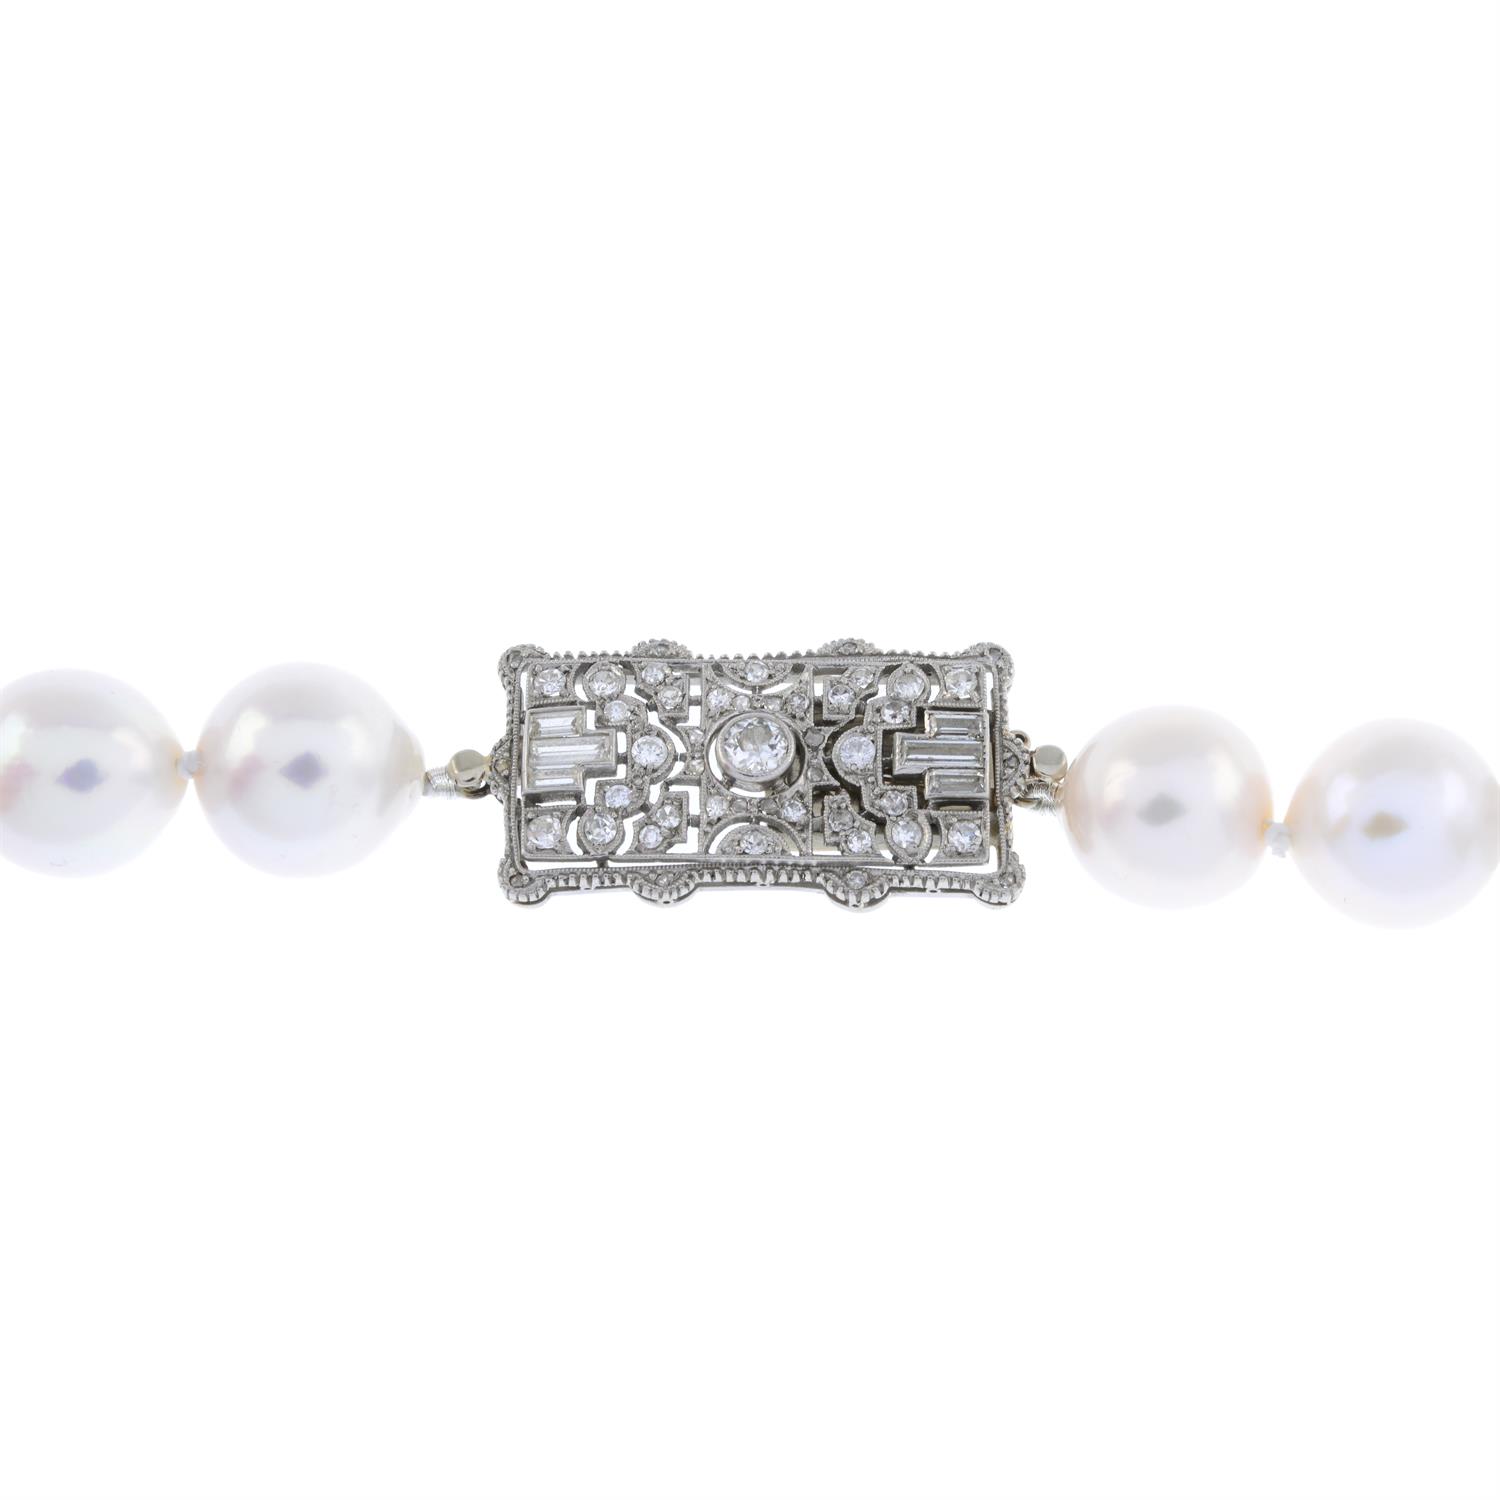 Cultured pearl and diamond necklace - Image 4 of 7